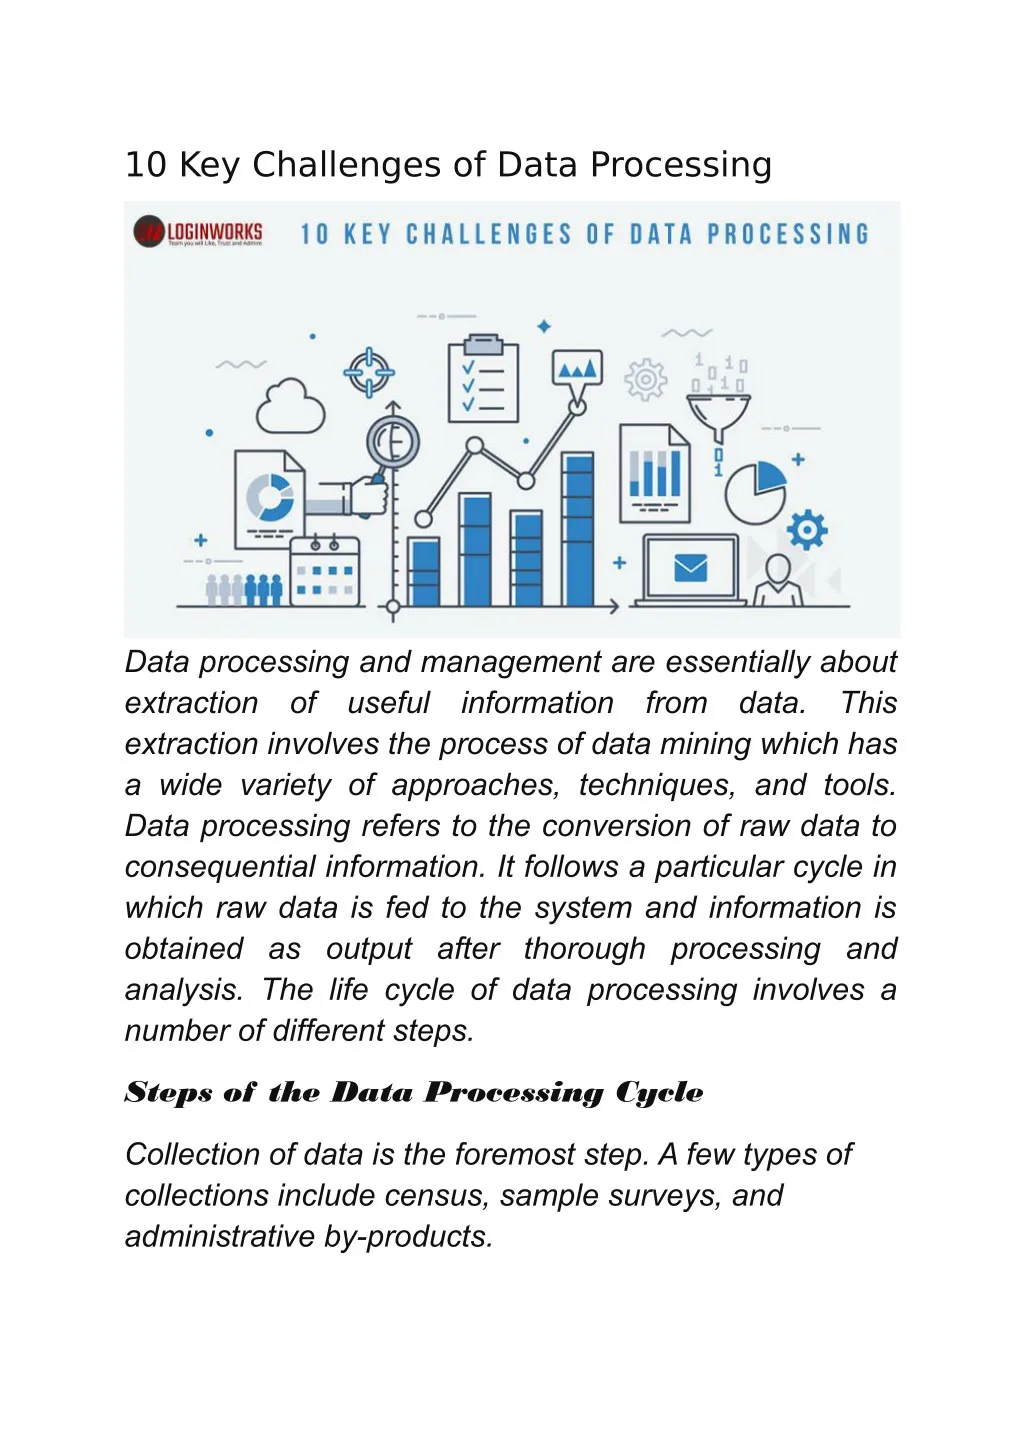 10 key challenges of data processing